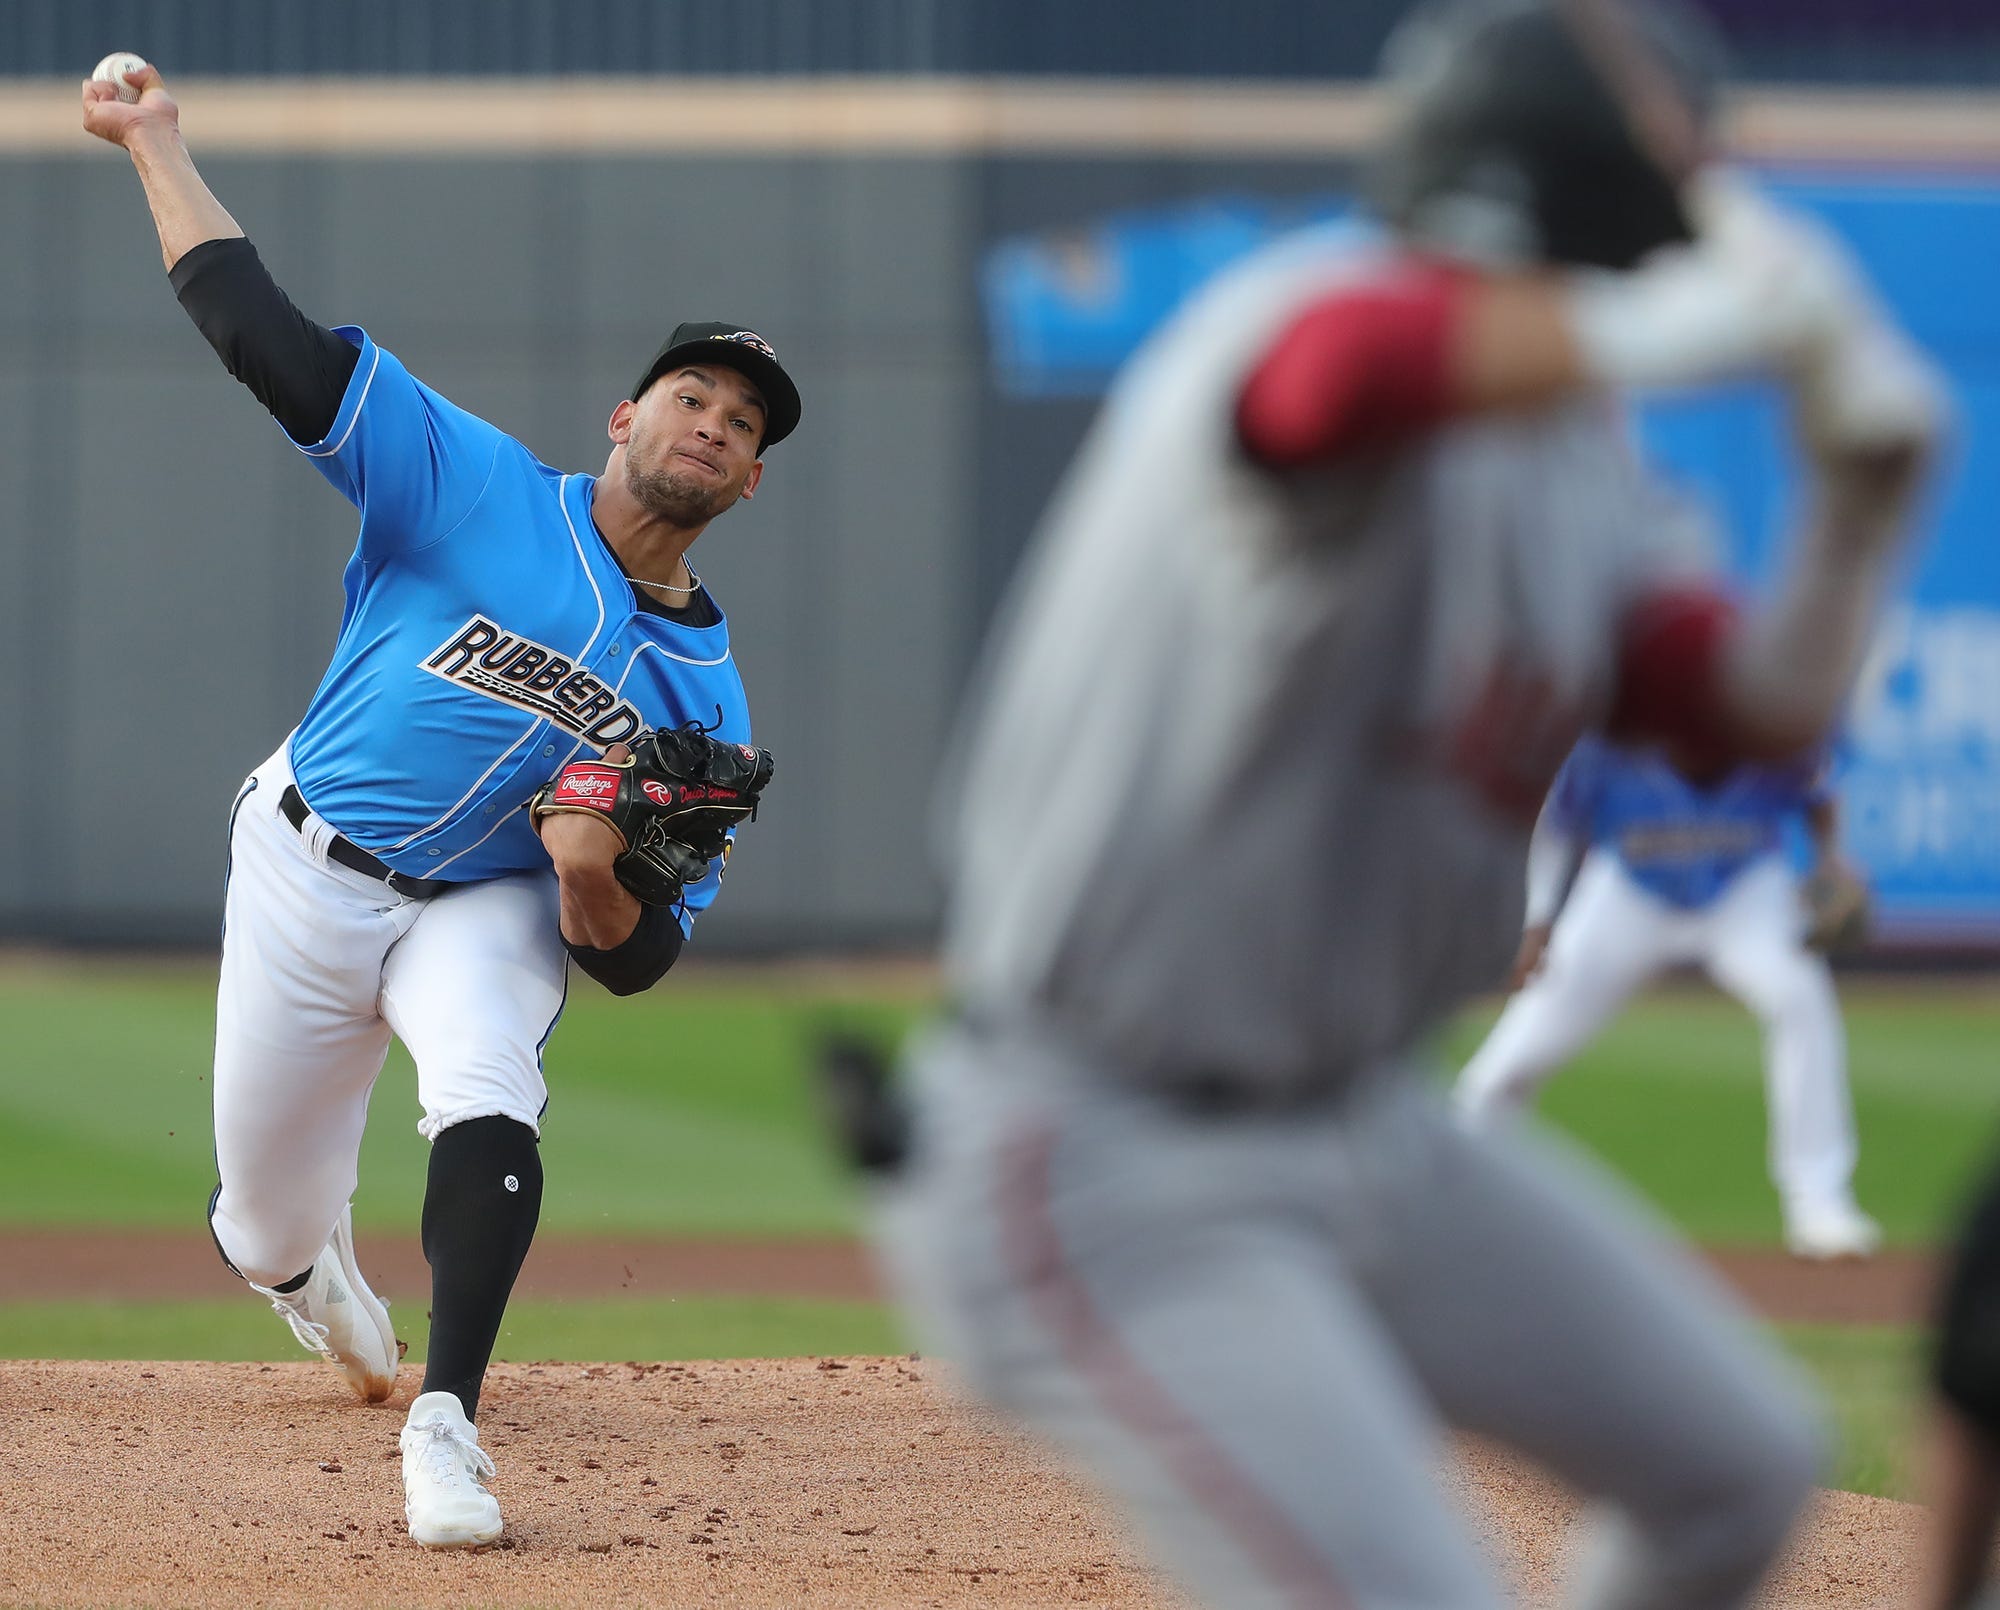 Akron RubberDucks starting pitcher Daniel Espino throws against the Altoona Curve during the first inning of an MiLB baseball game at Canal Park.